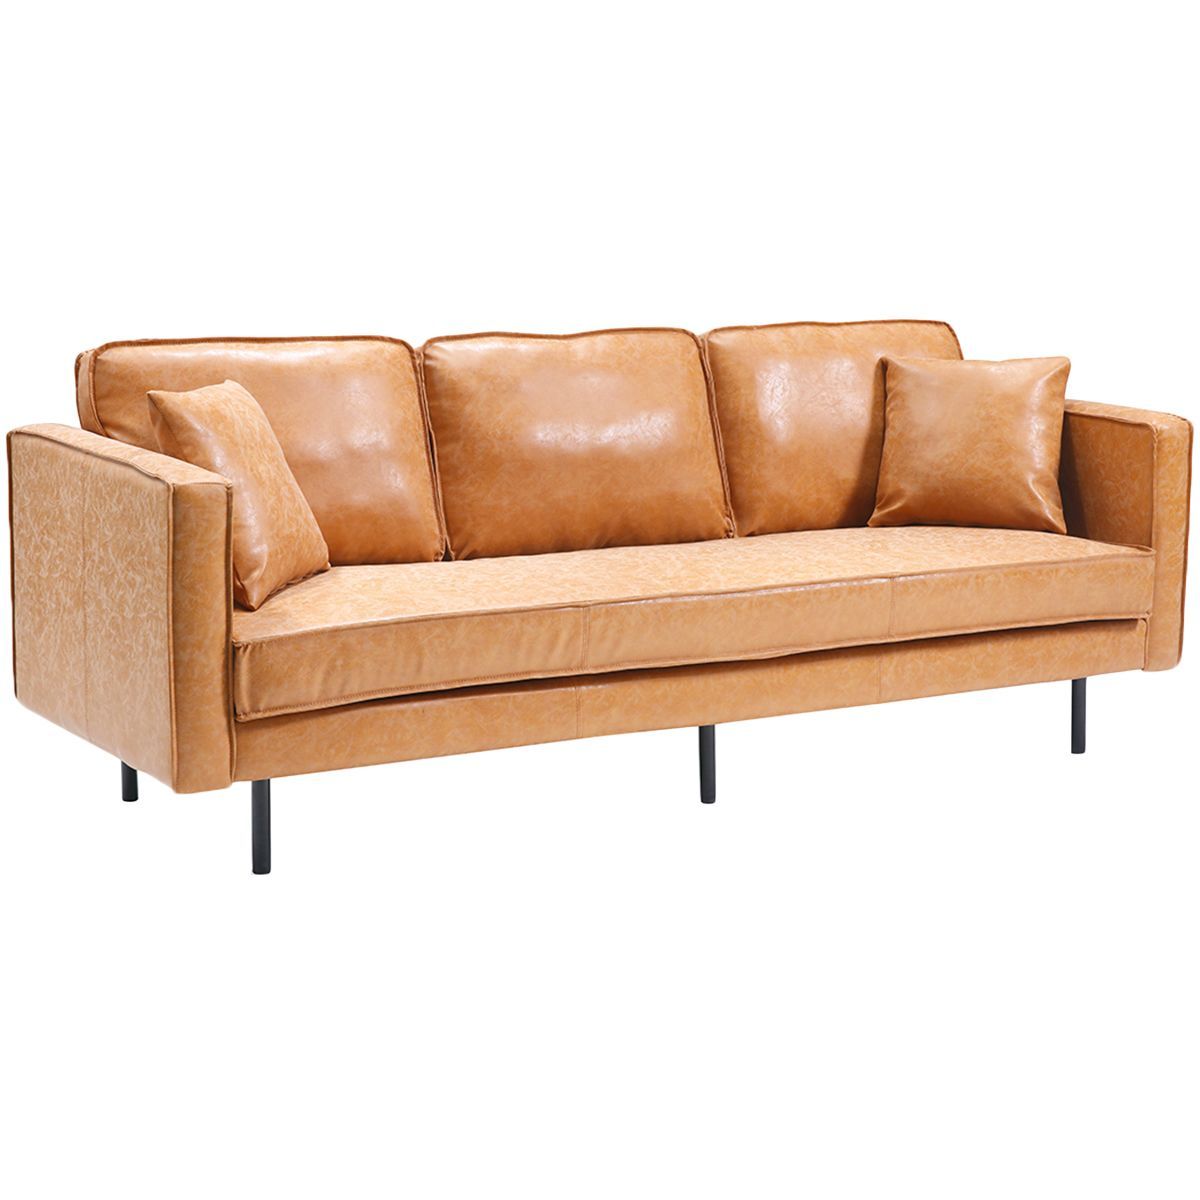 Verona 3 Seater Faux Leather Sofa | Temple & Webster | Faux Leather With Regard To Traditional 3 Seater Faux Leather Sofas (Gallery 5 of 20)